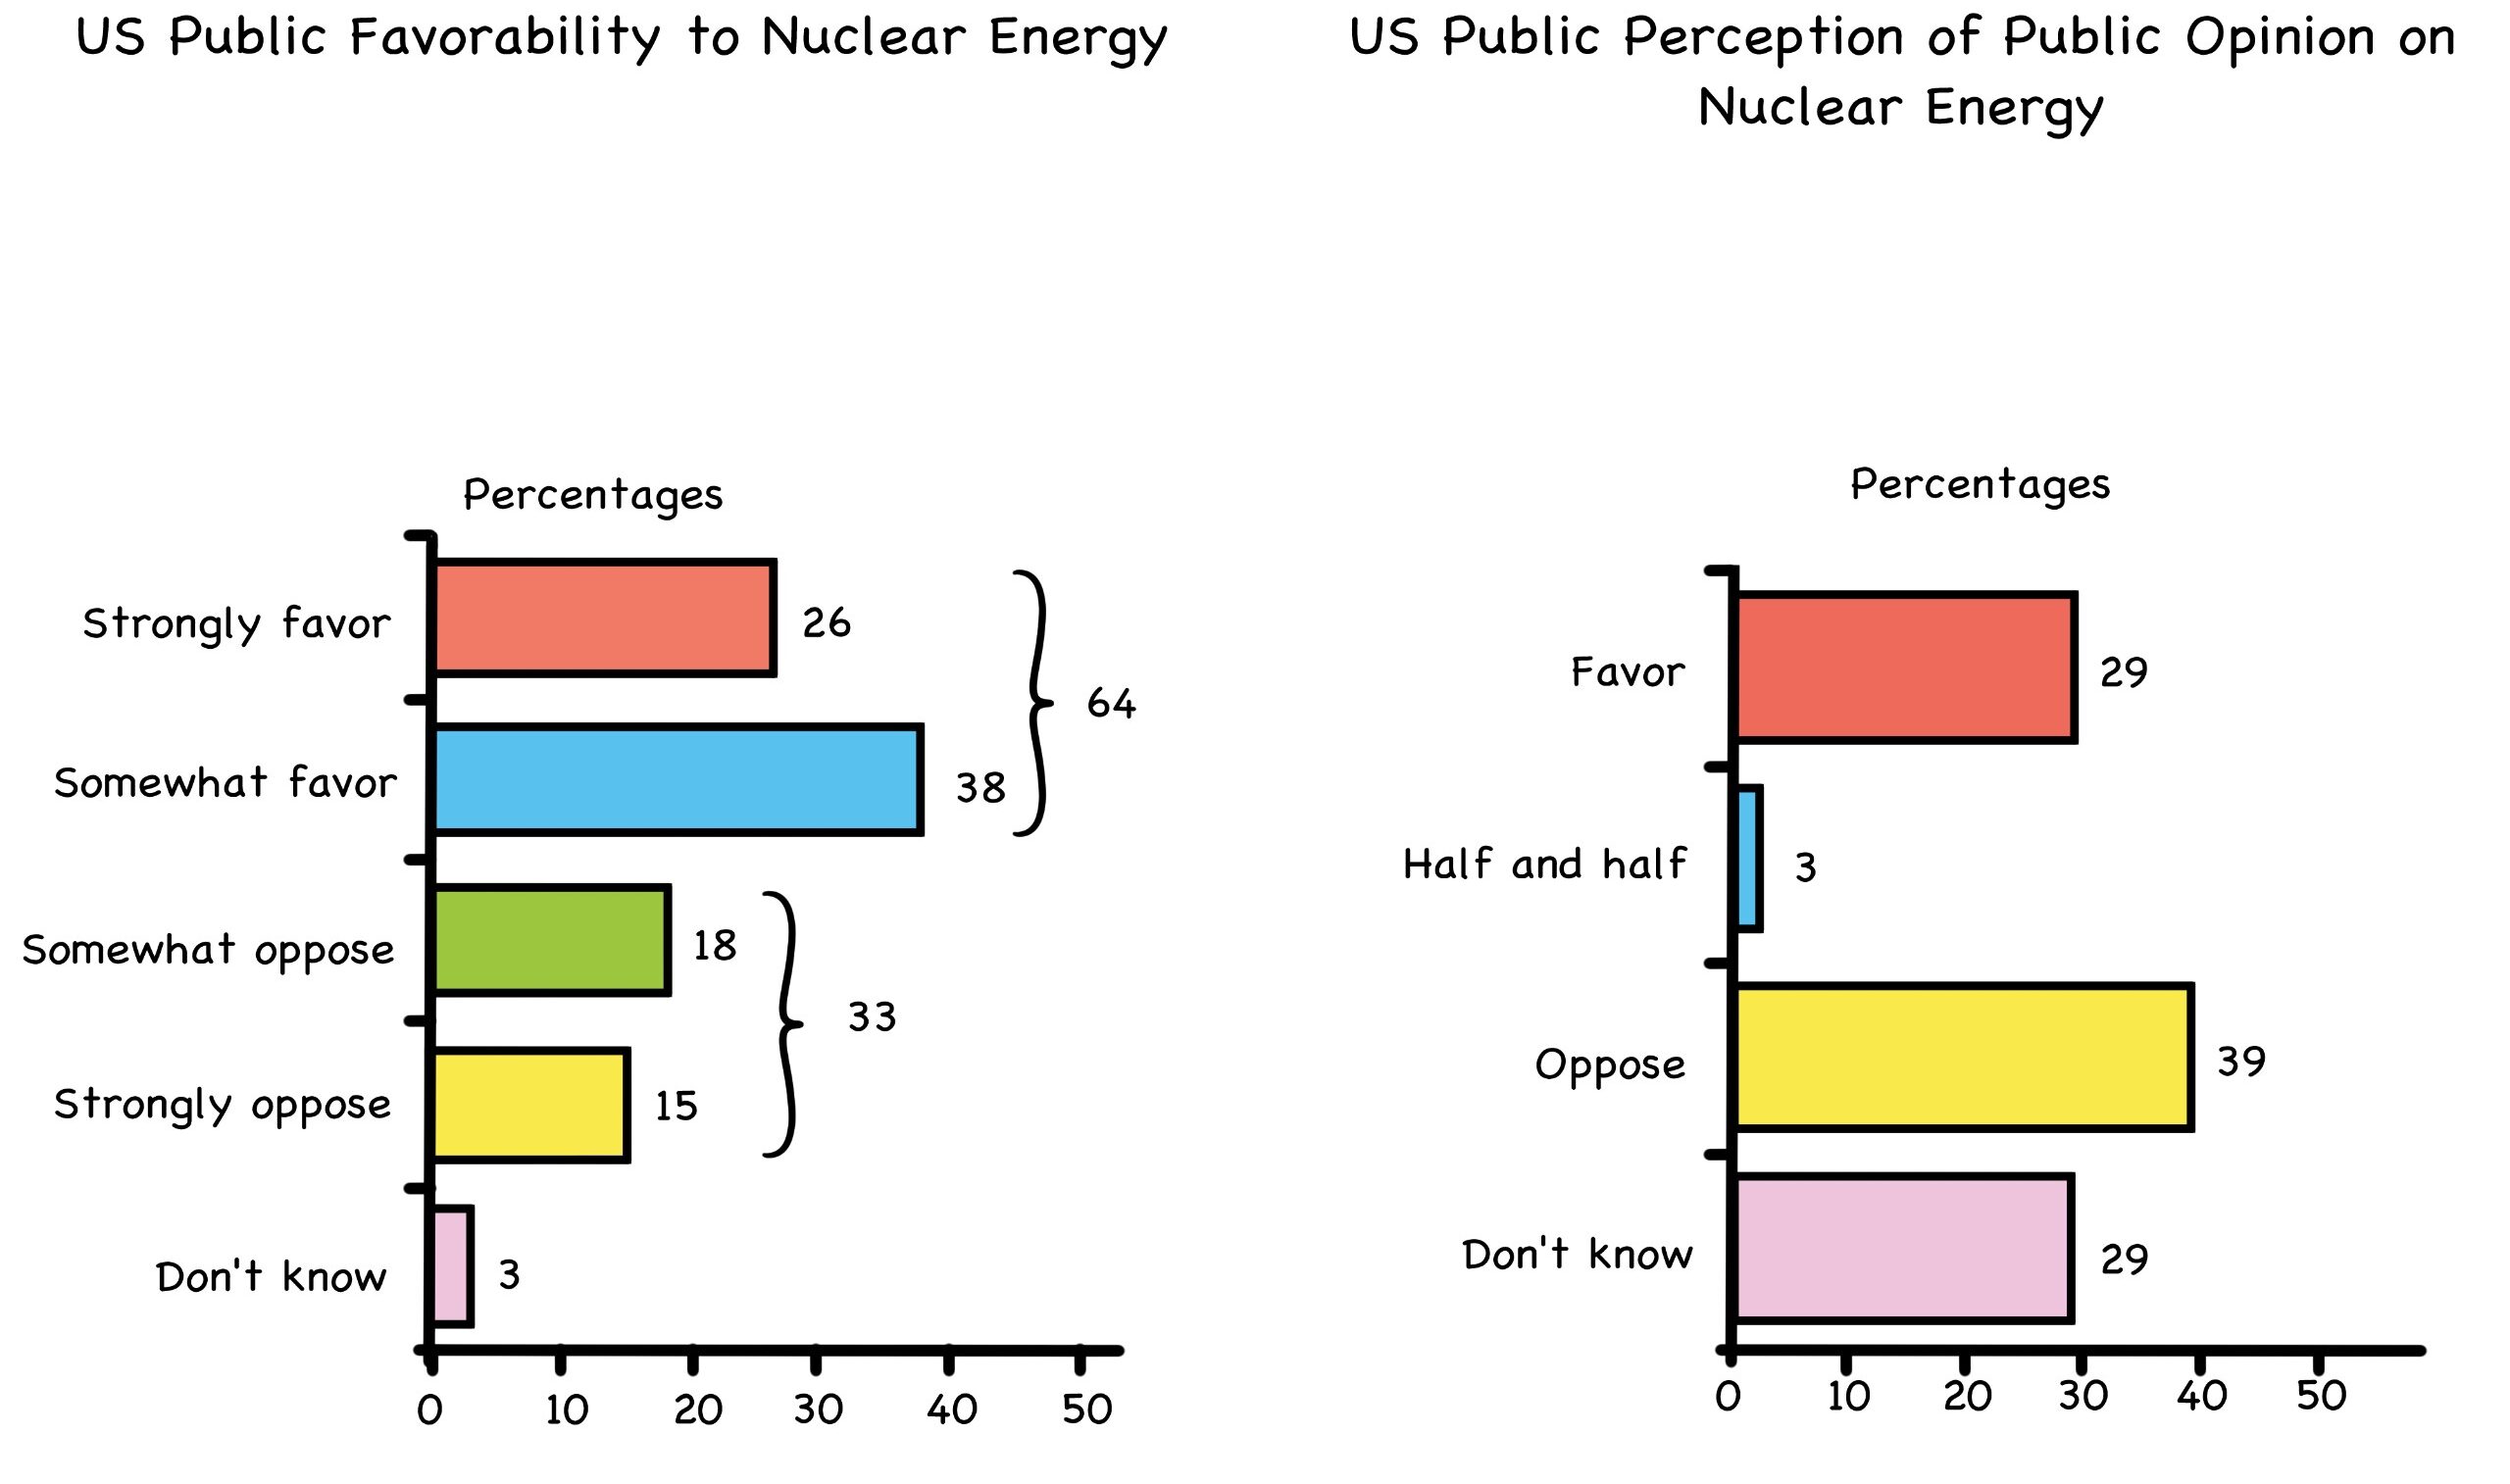 Fig. 63: Public Favorability of Nuclear Power vs The Public’s Perception of Nuclear’s Favorability (2015)